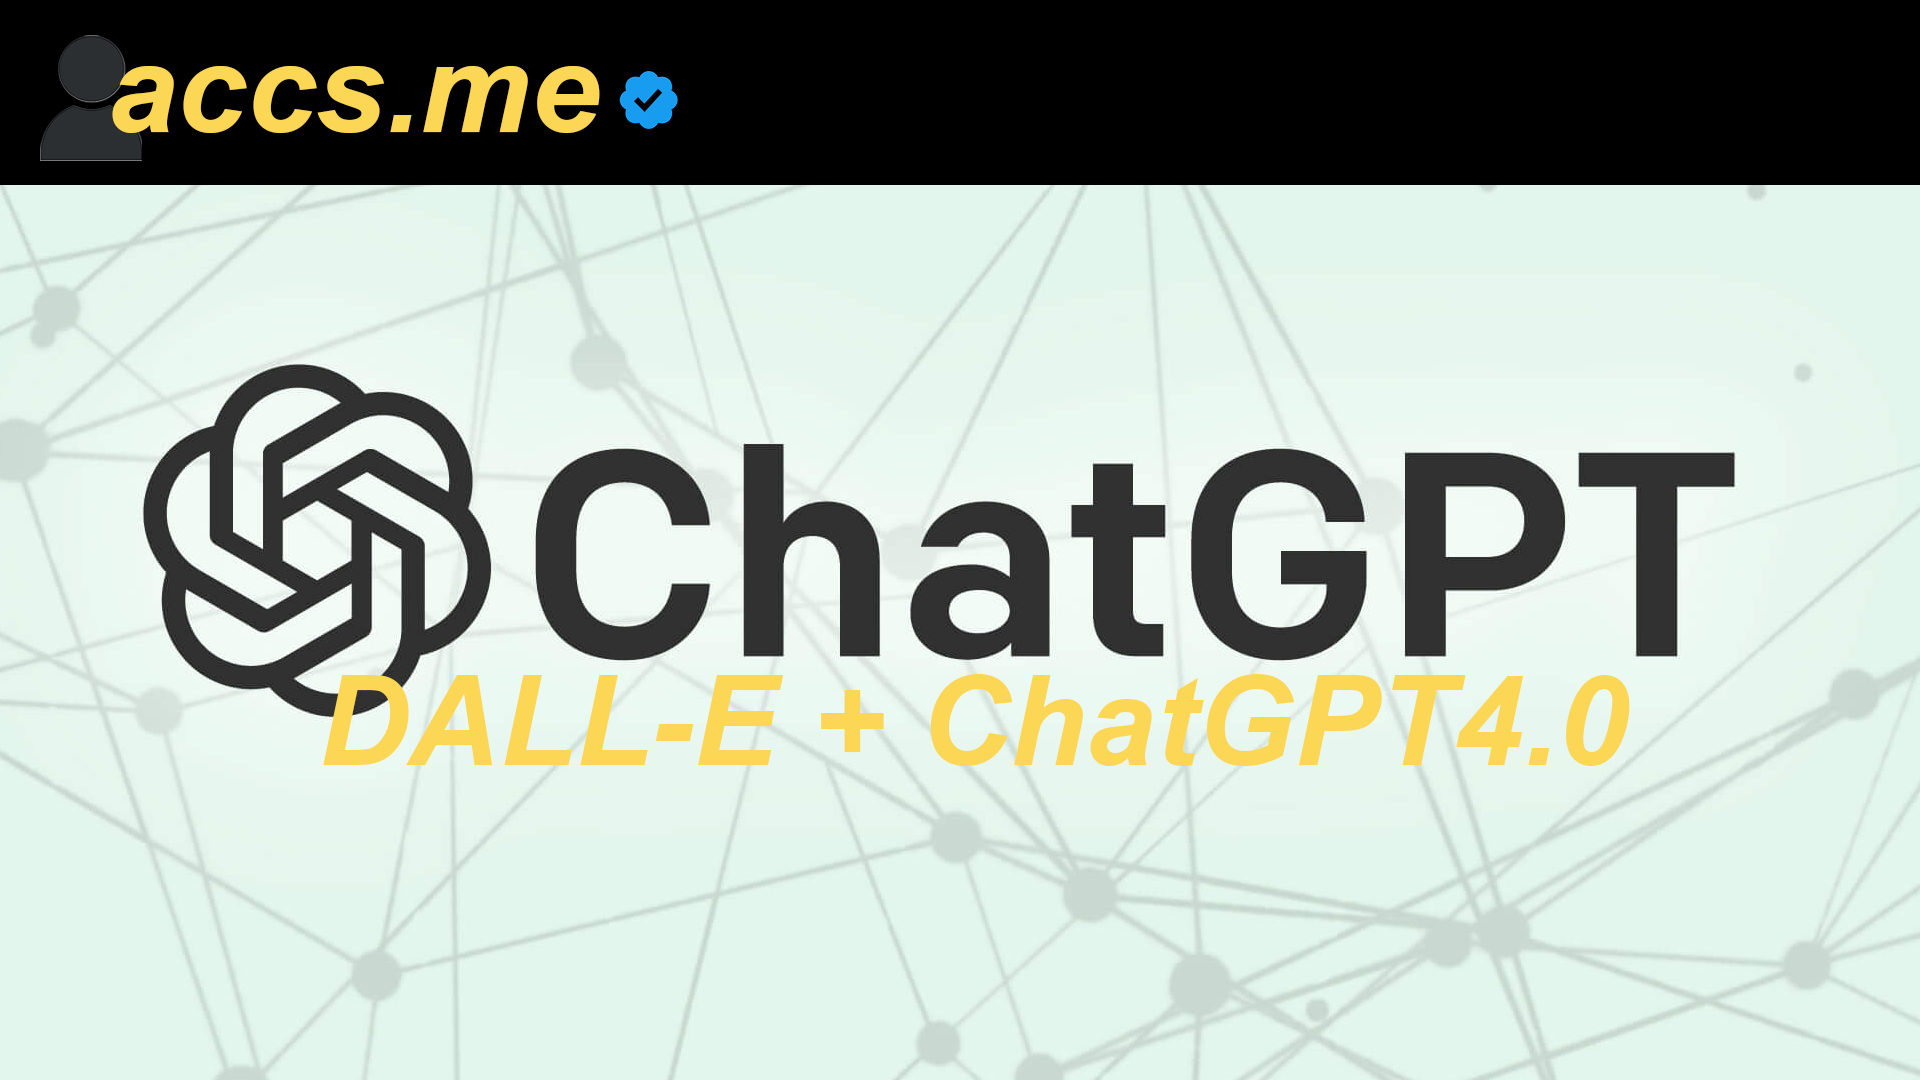 ChatGPT PLUS Accounts with DALL-E + ChatGPT4.0 [1 Month]